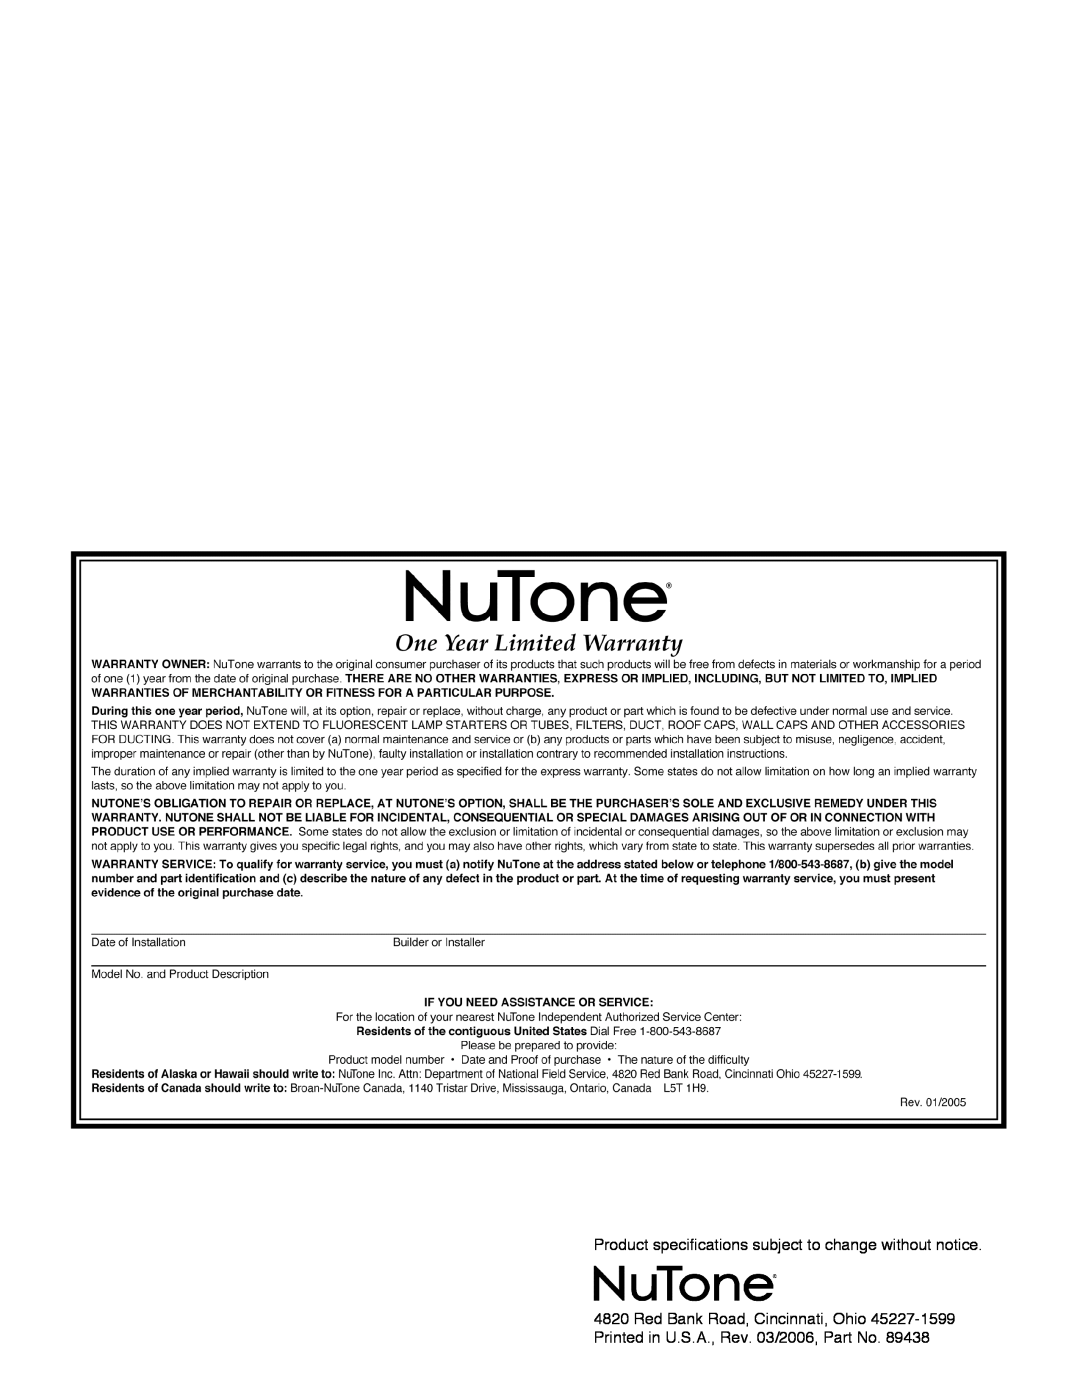 NuTone F305C installation instructions Product specifications subject to change without notice 